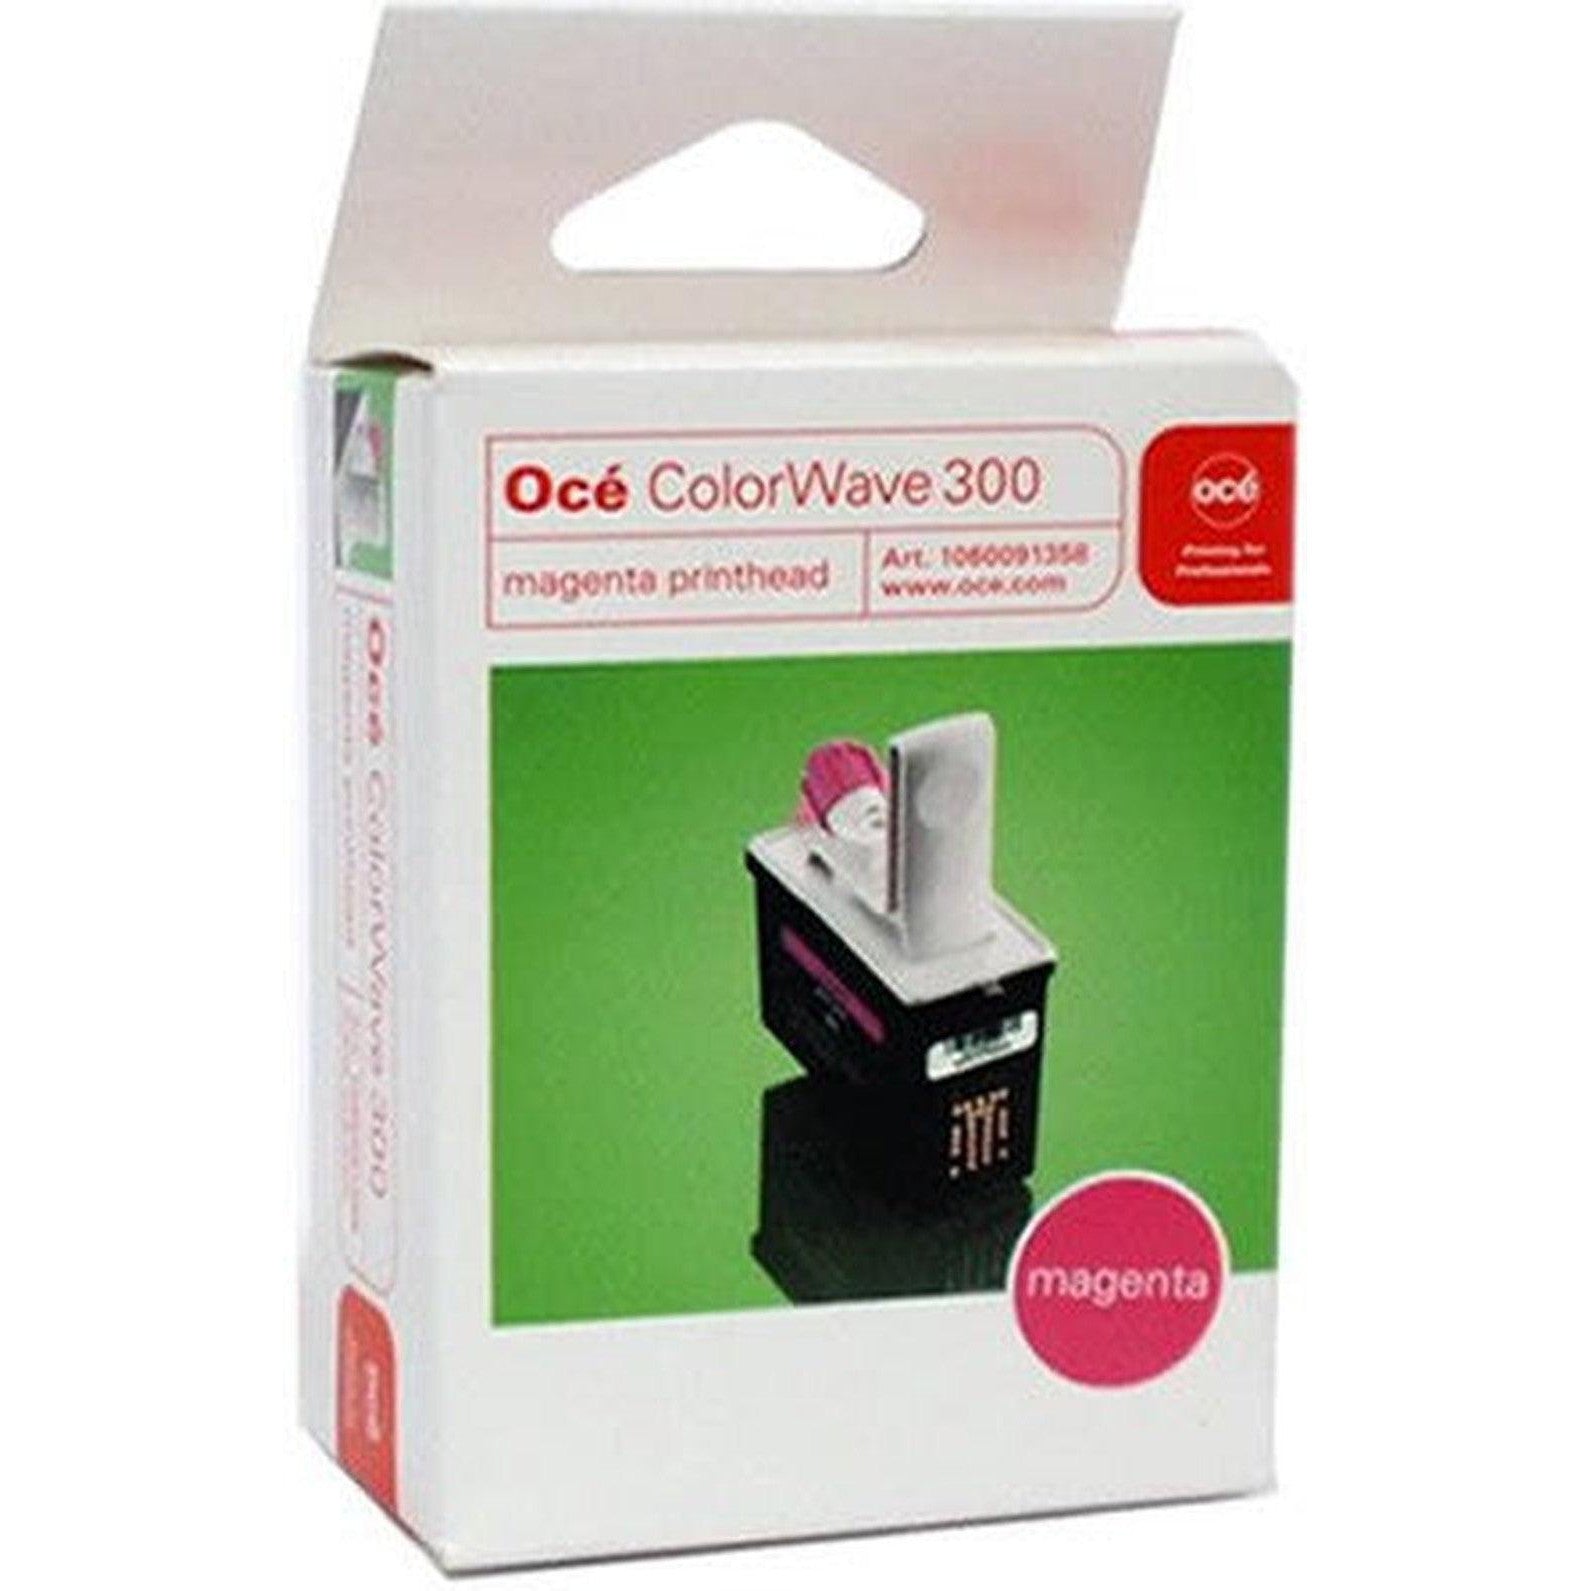 Oce Colorwave 300 Magenta Printhead-Inks And Toners-OCE-Star Light Kuwait